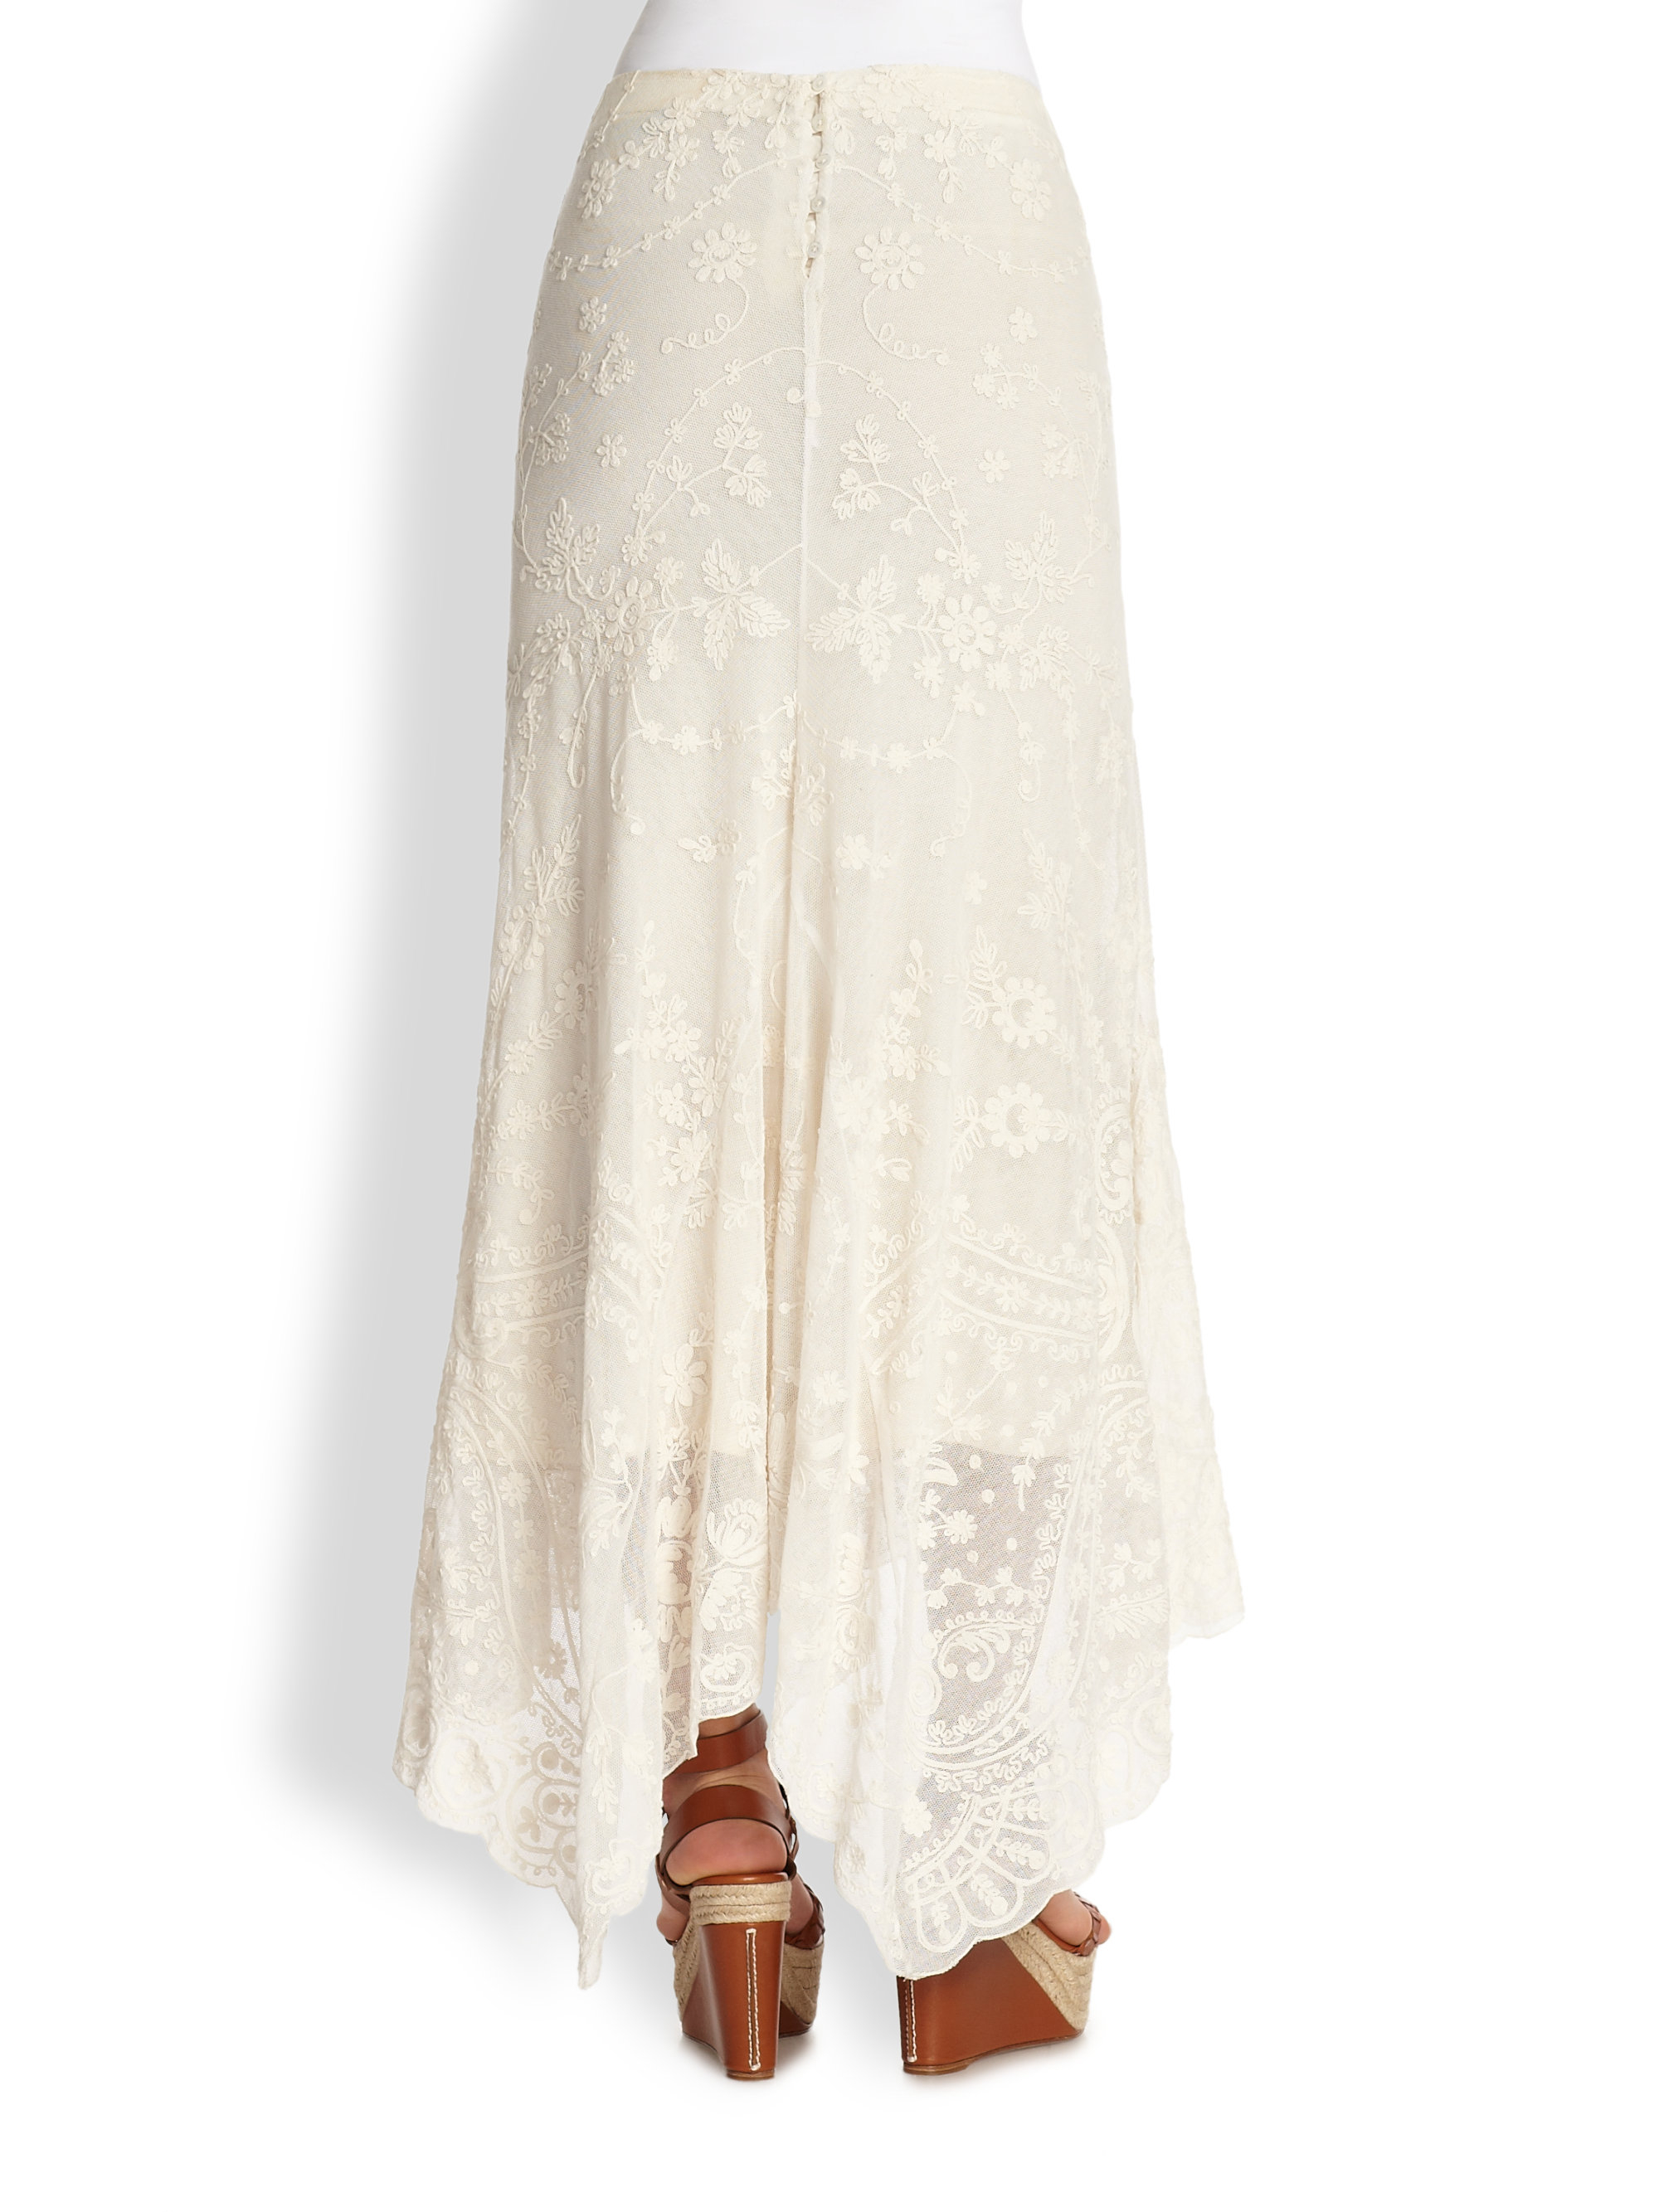 Polo Ralph Lauren Kemra Lace Maxi Skirt in White - Lyst